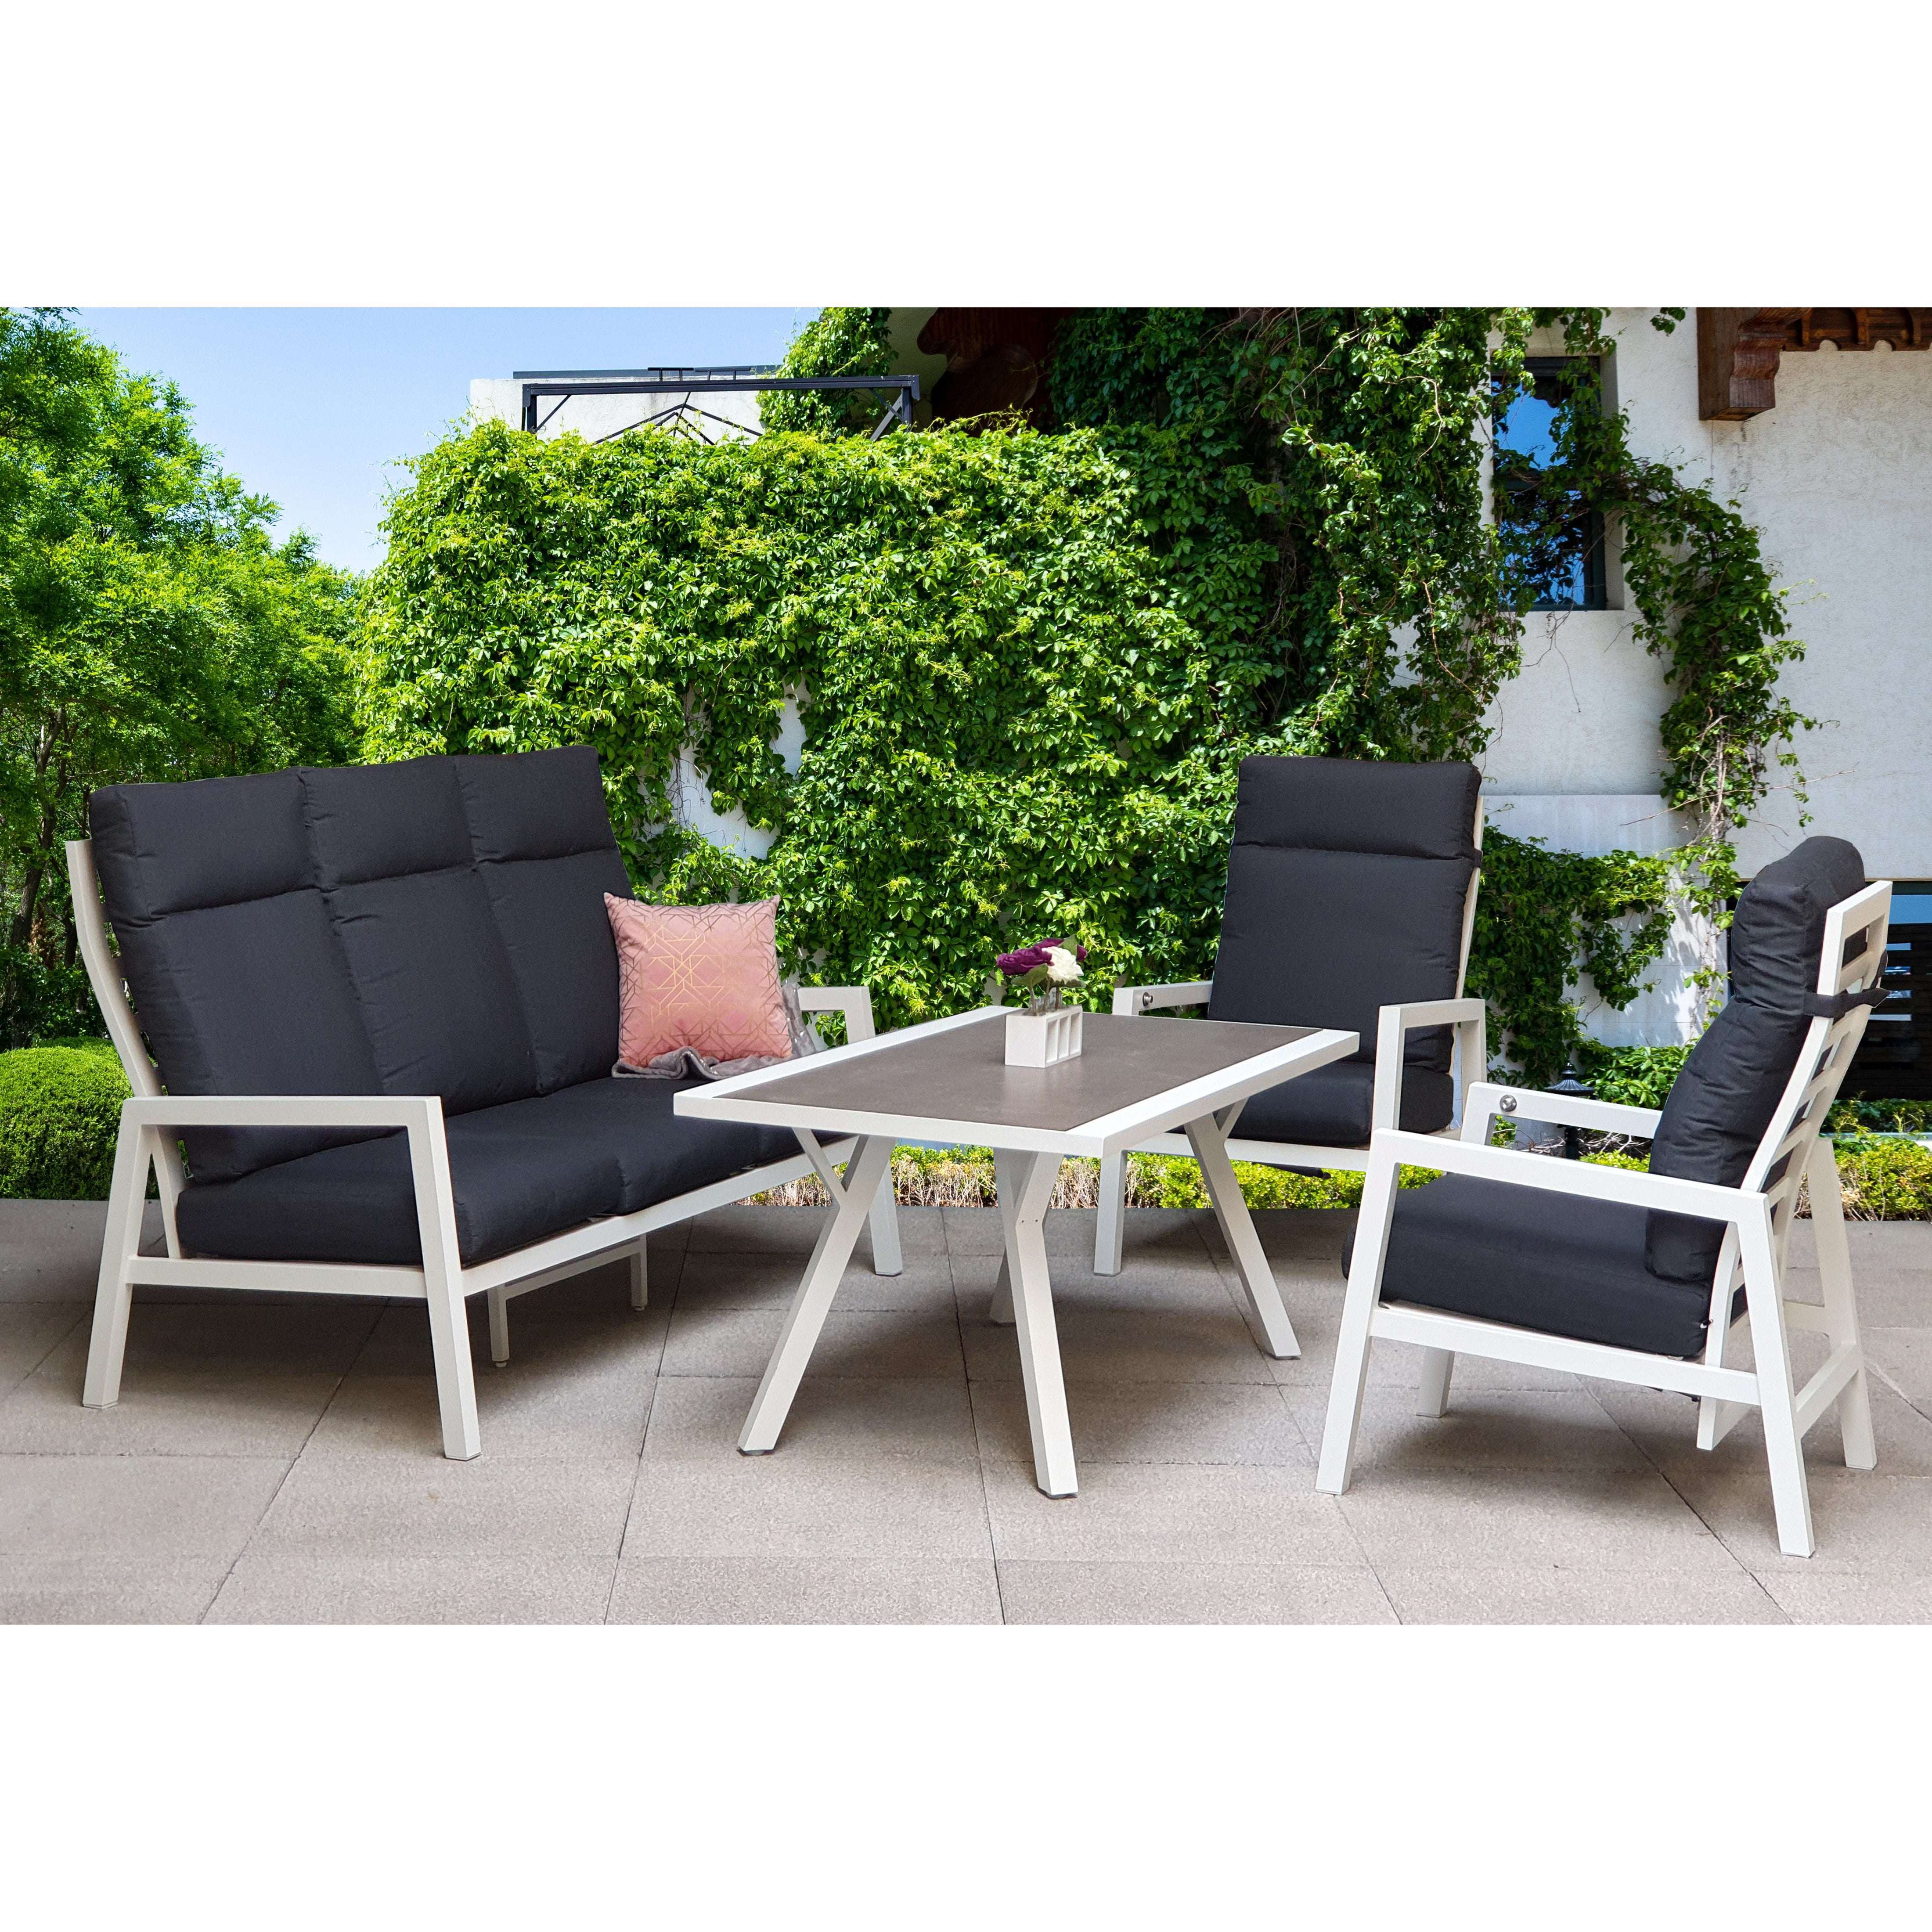 Exceptional Garden:Signature Weave Kimmie 5-Seater Dining Set with High Back Sofa